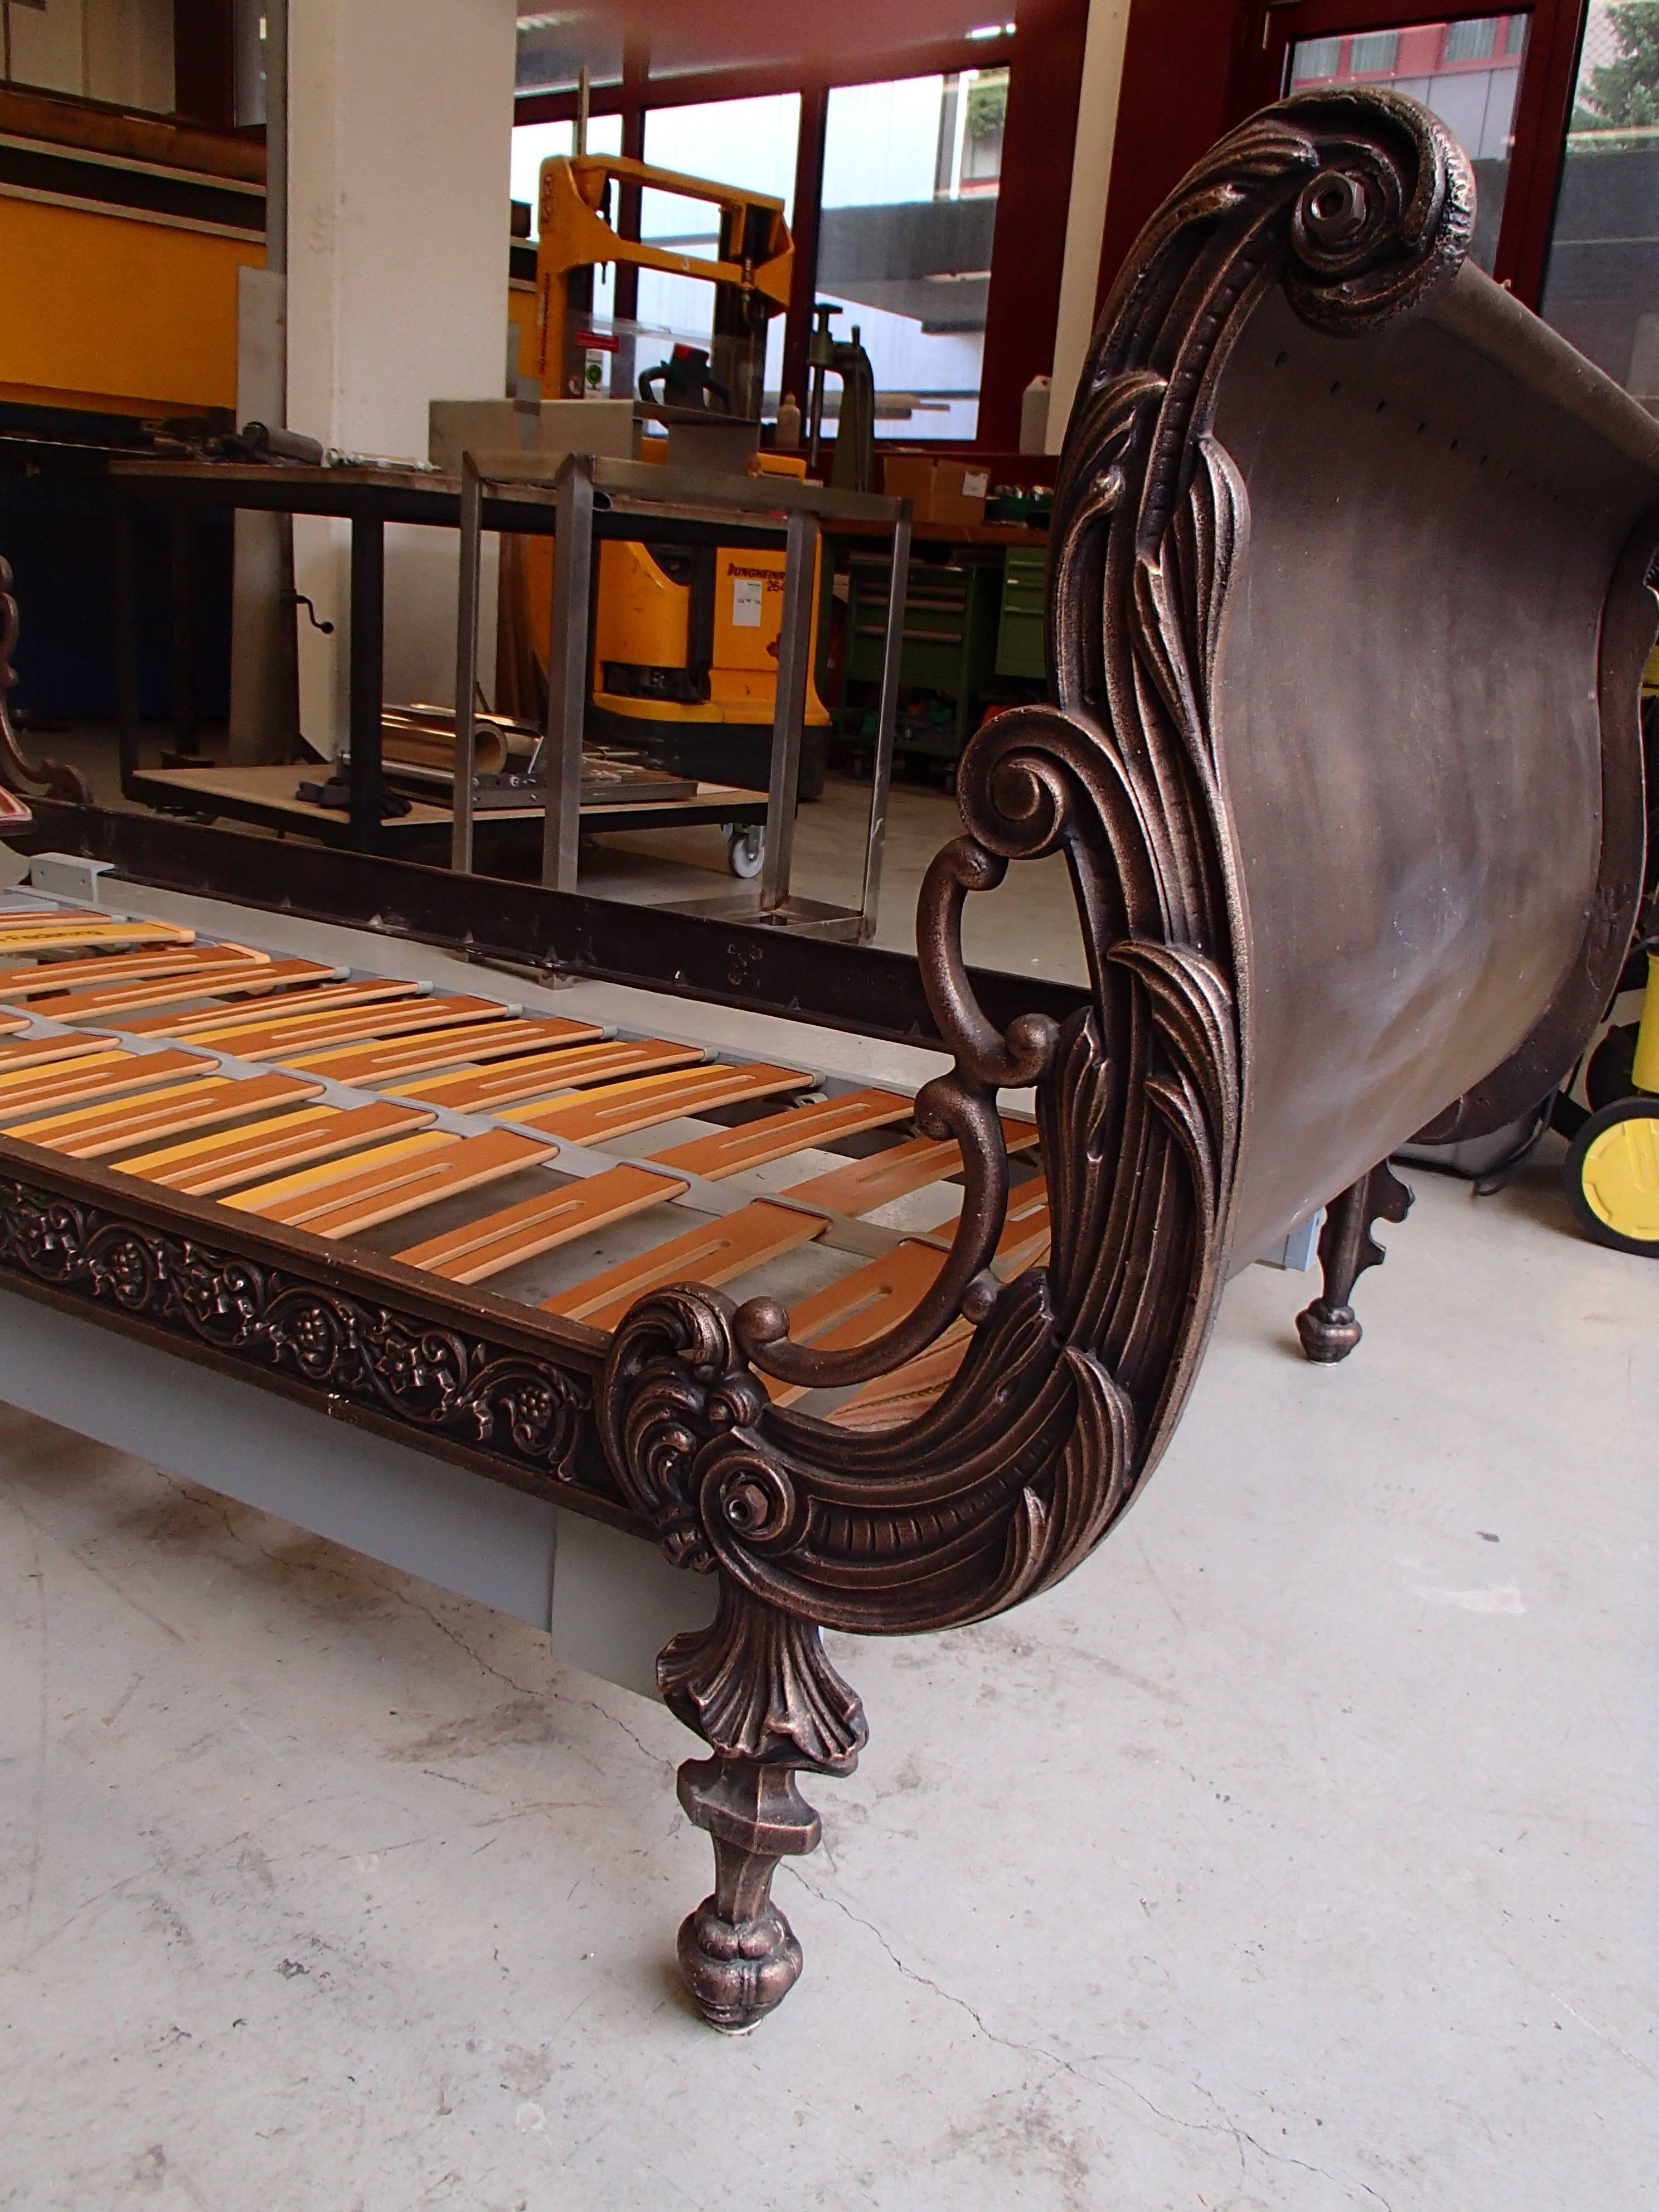 19th century daybed cast iron completely restored with copper patina and can be delivered with a custom-made inlay for the mattress Swiss quality with possibility to raise the head part. The inside is recovered with a matching brocat.